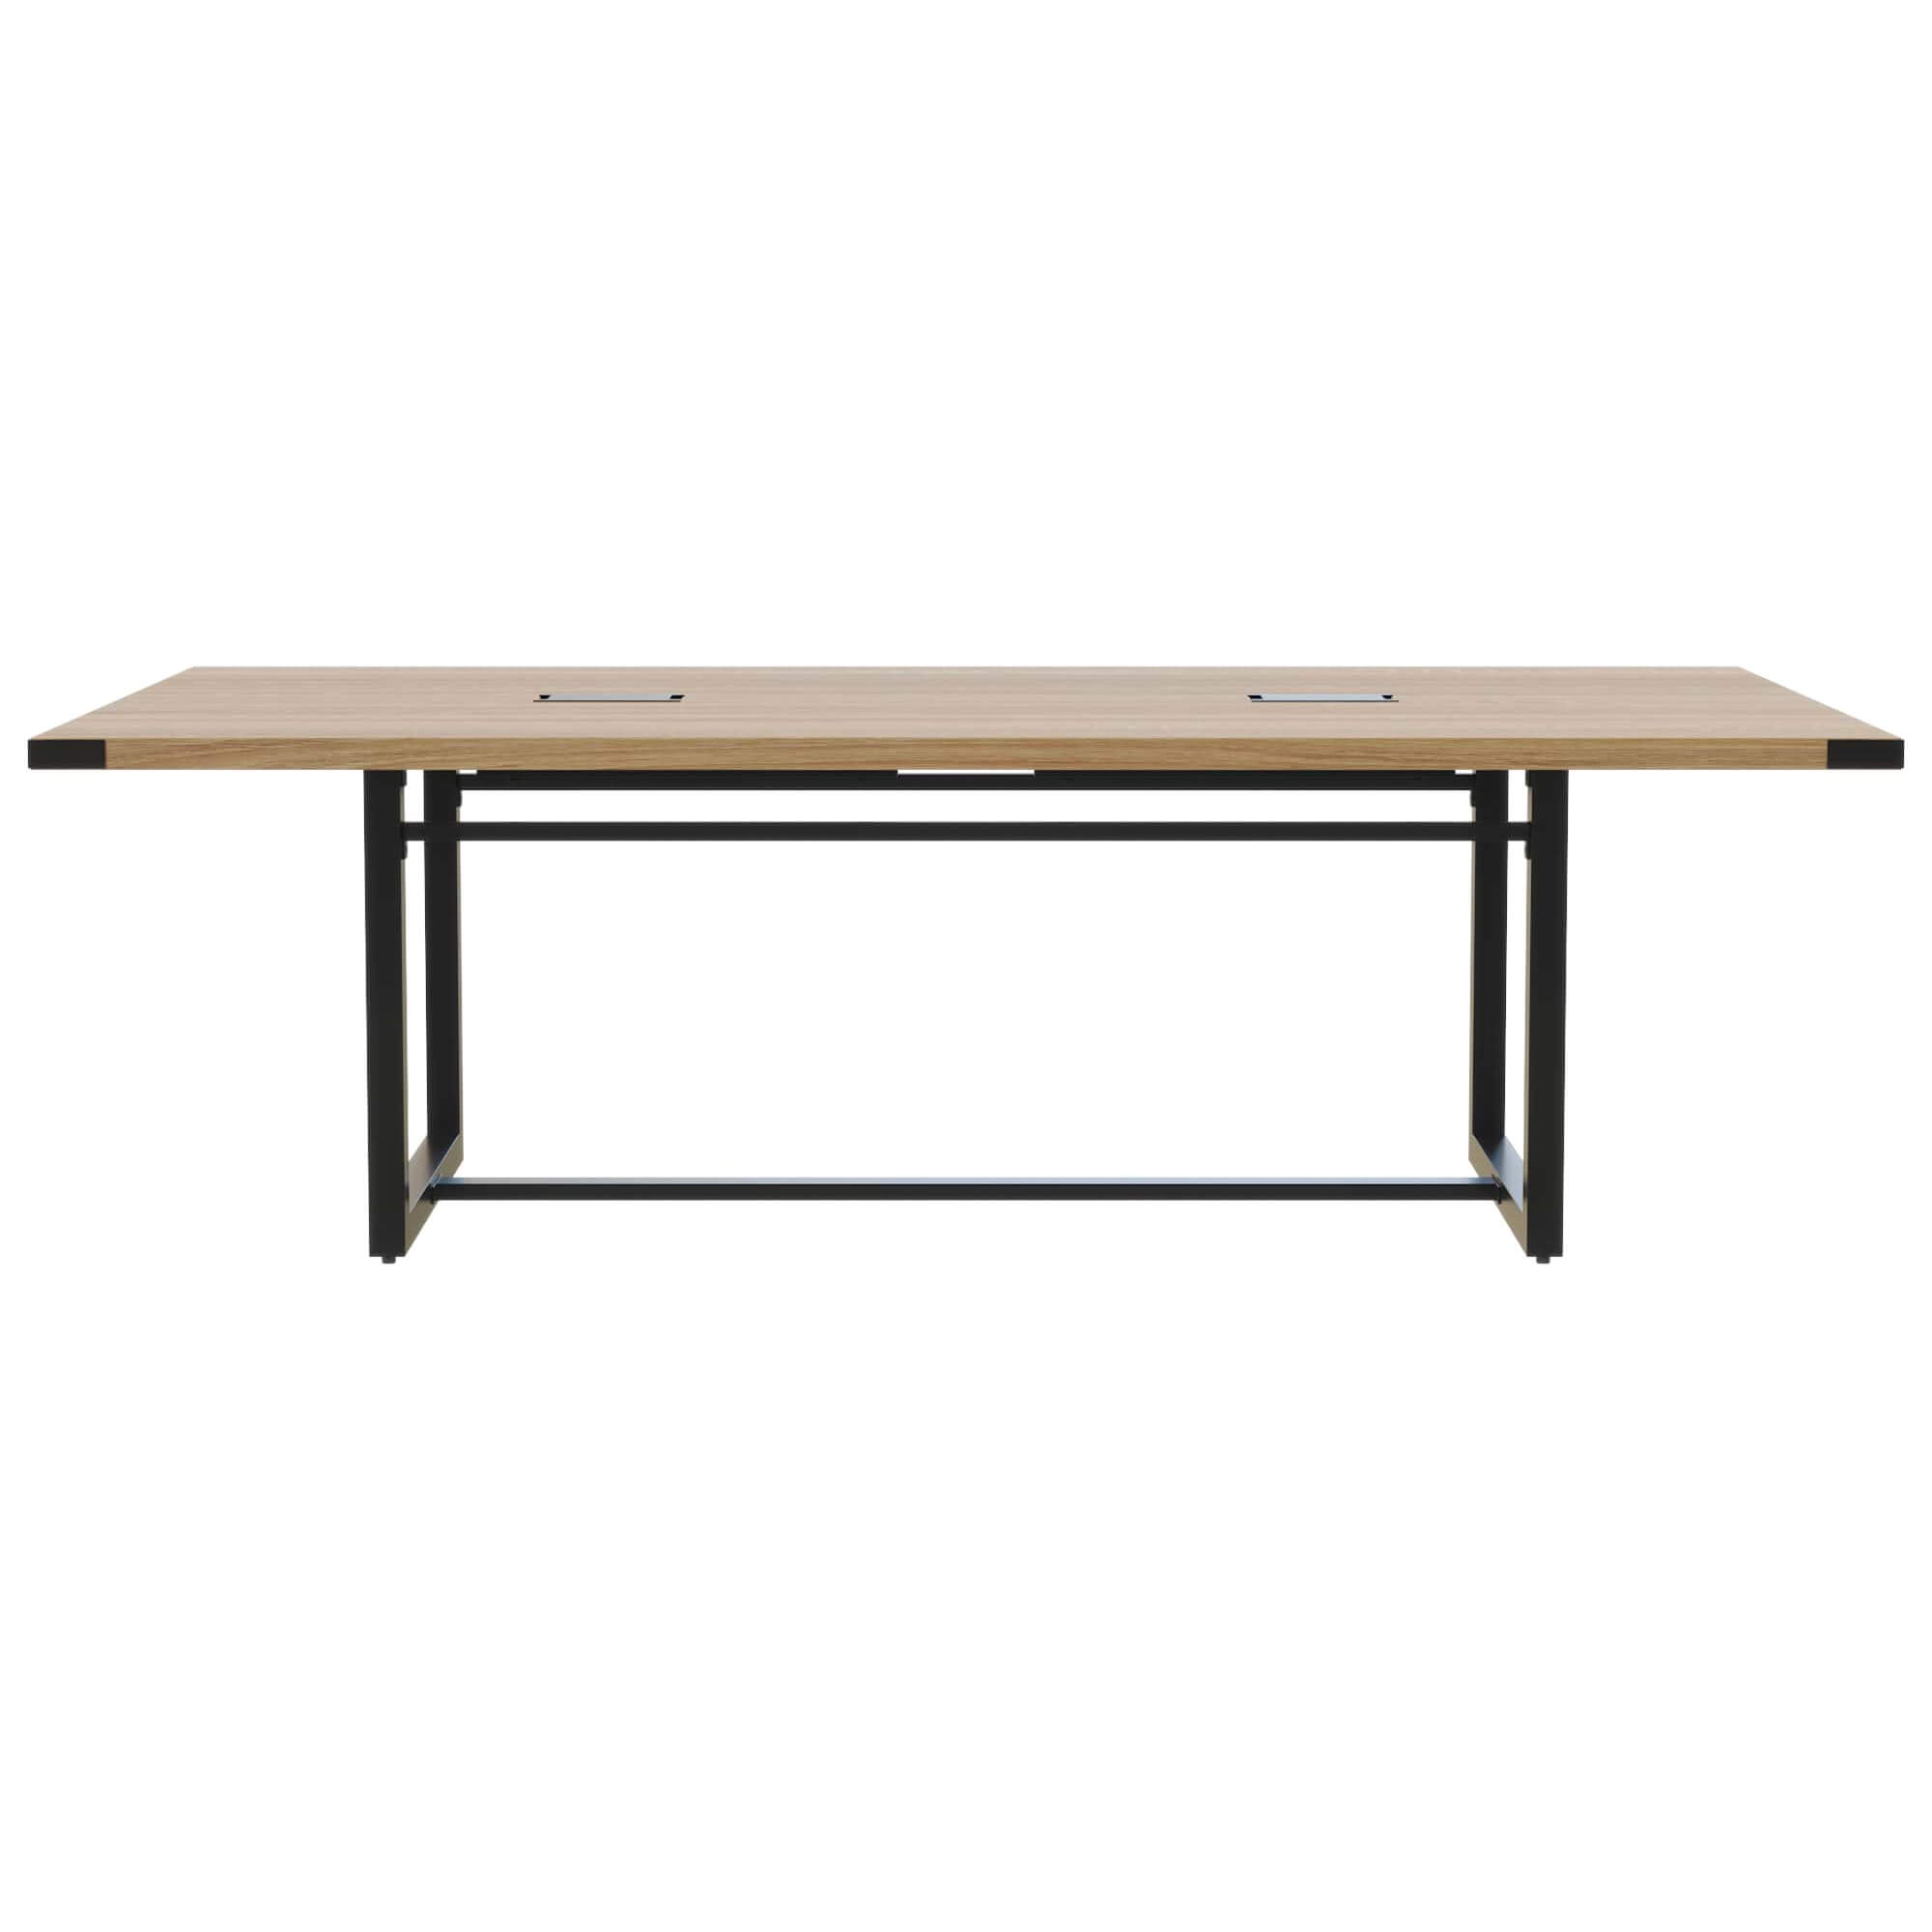 Conference tables CUB MRCS8SDD FAS front 1 2